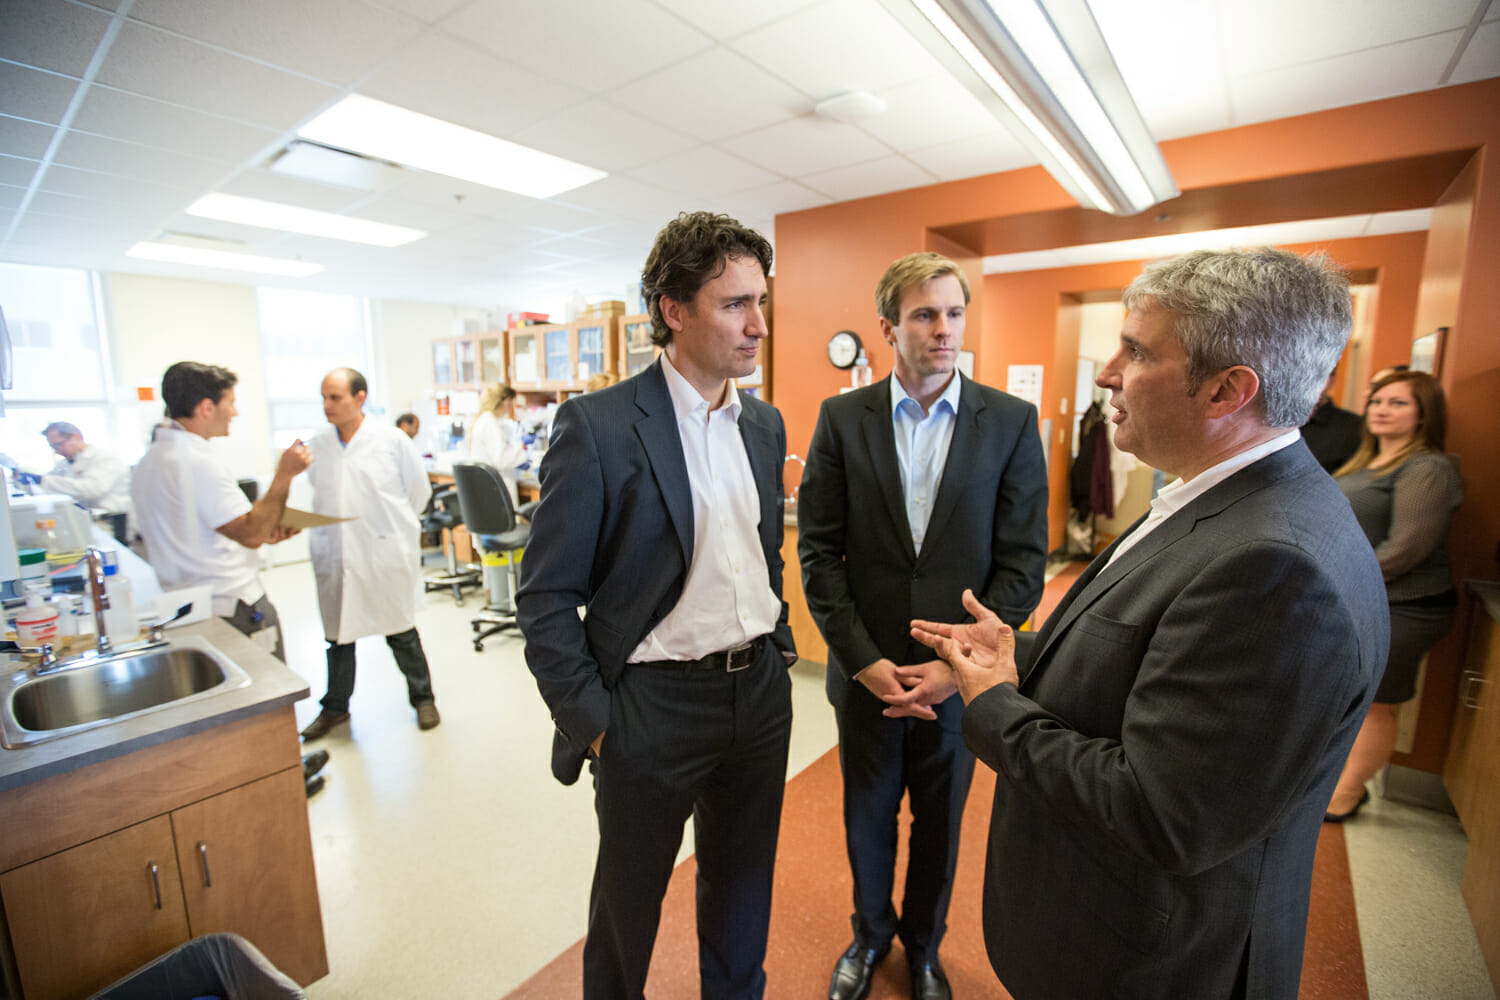 Justin and New Brunswick Liberal Leader Brian Gallant visit the Atlantic Cancer Research Institute. Moncton, NB. June 12, 2014.